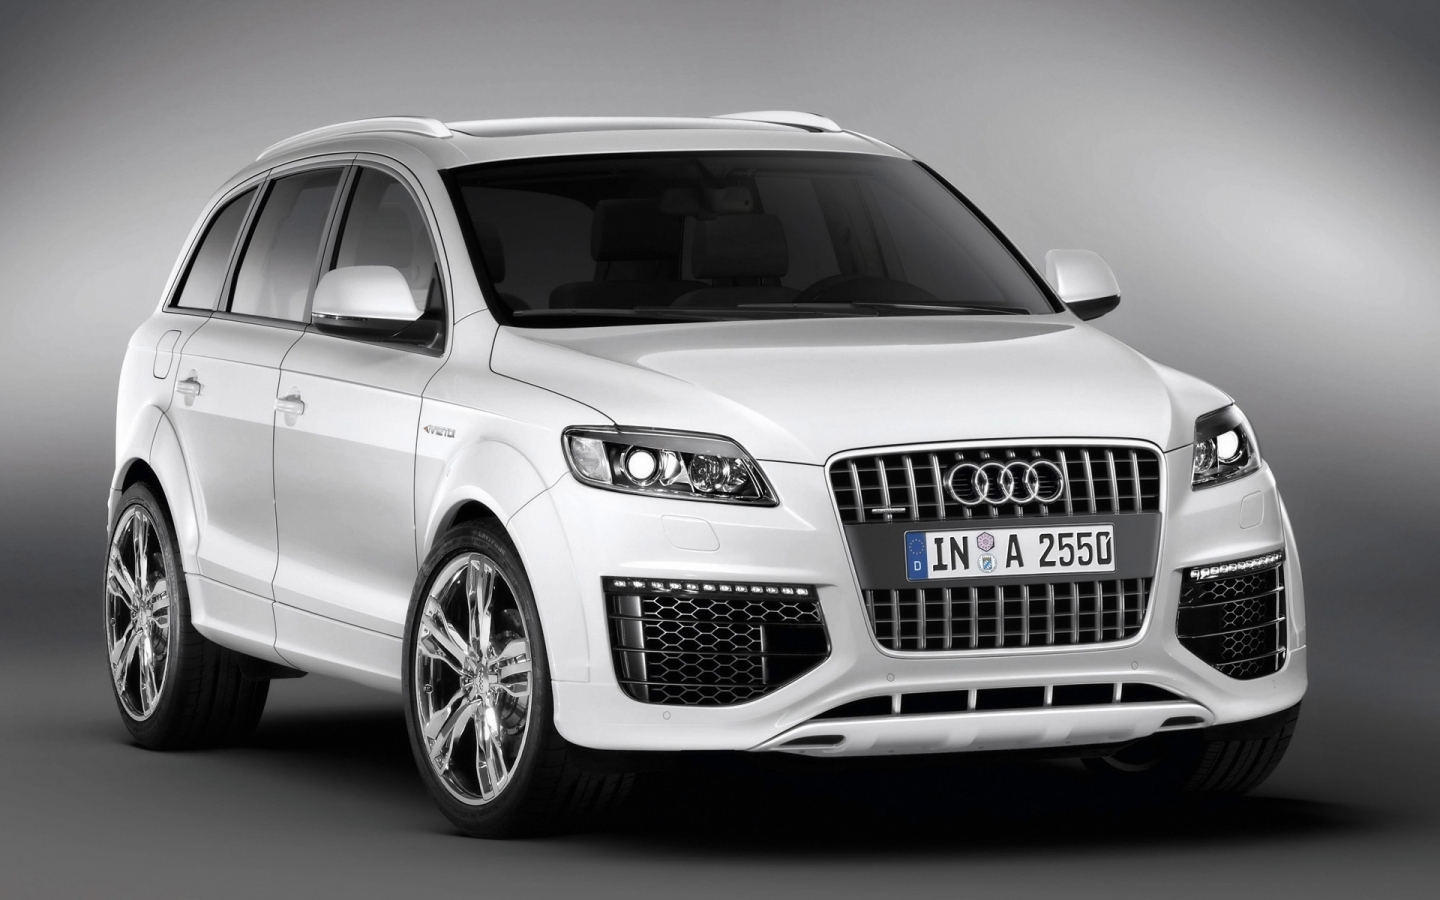 Audi Q7 Coastline front and side for 1440 x 900 widescreen resolution